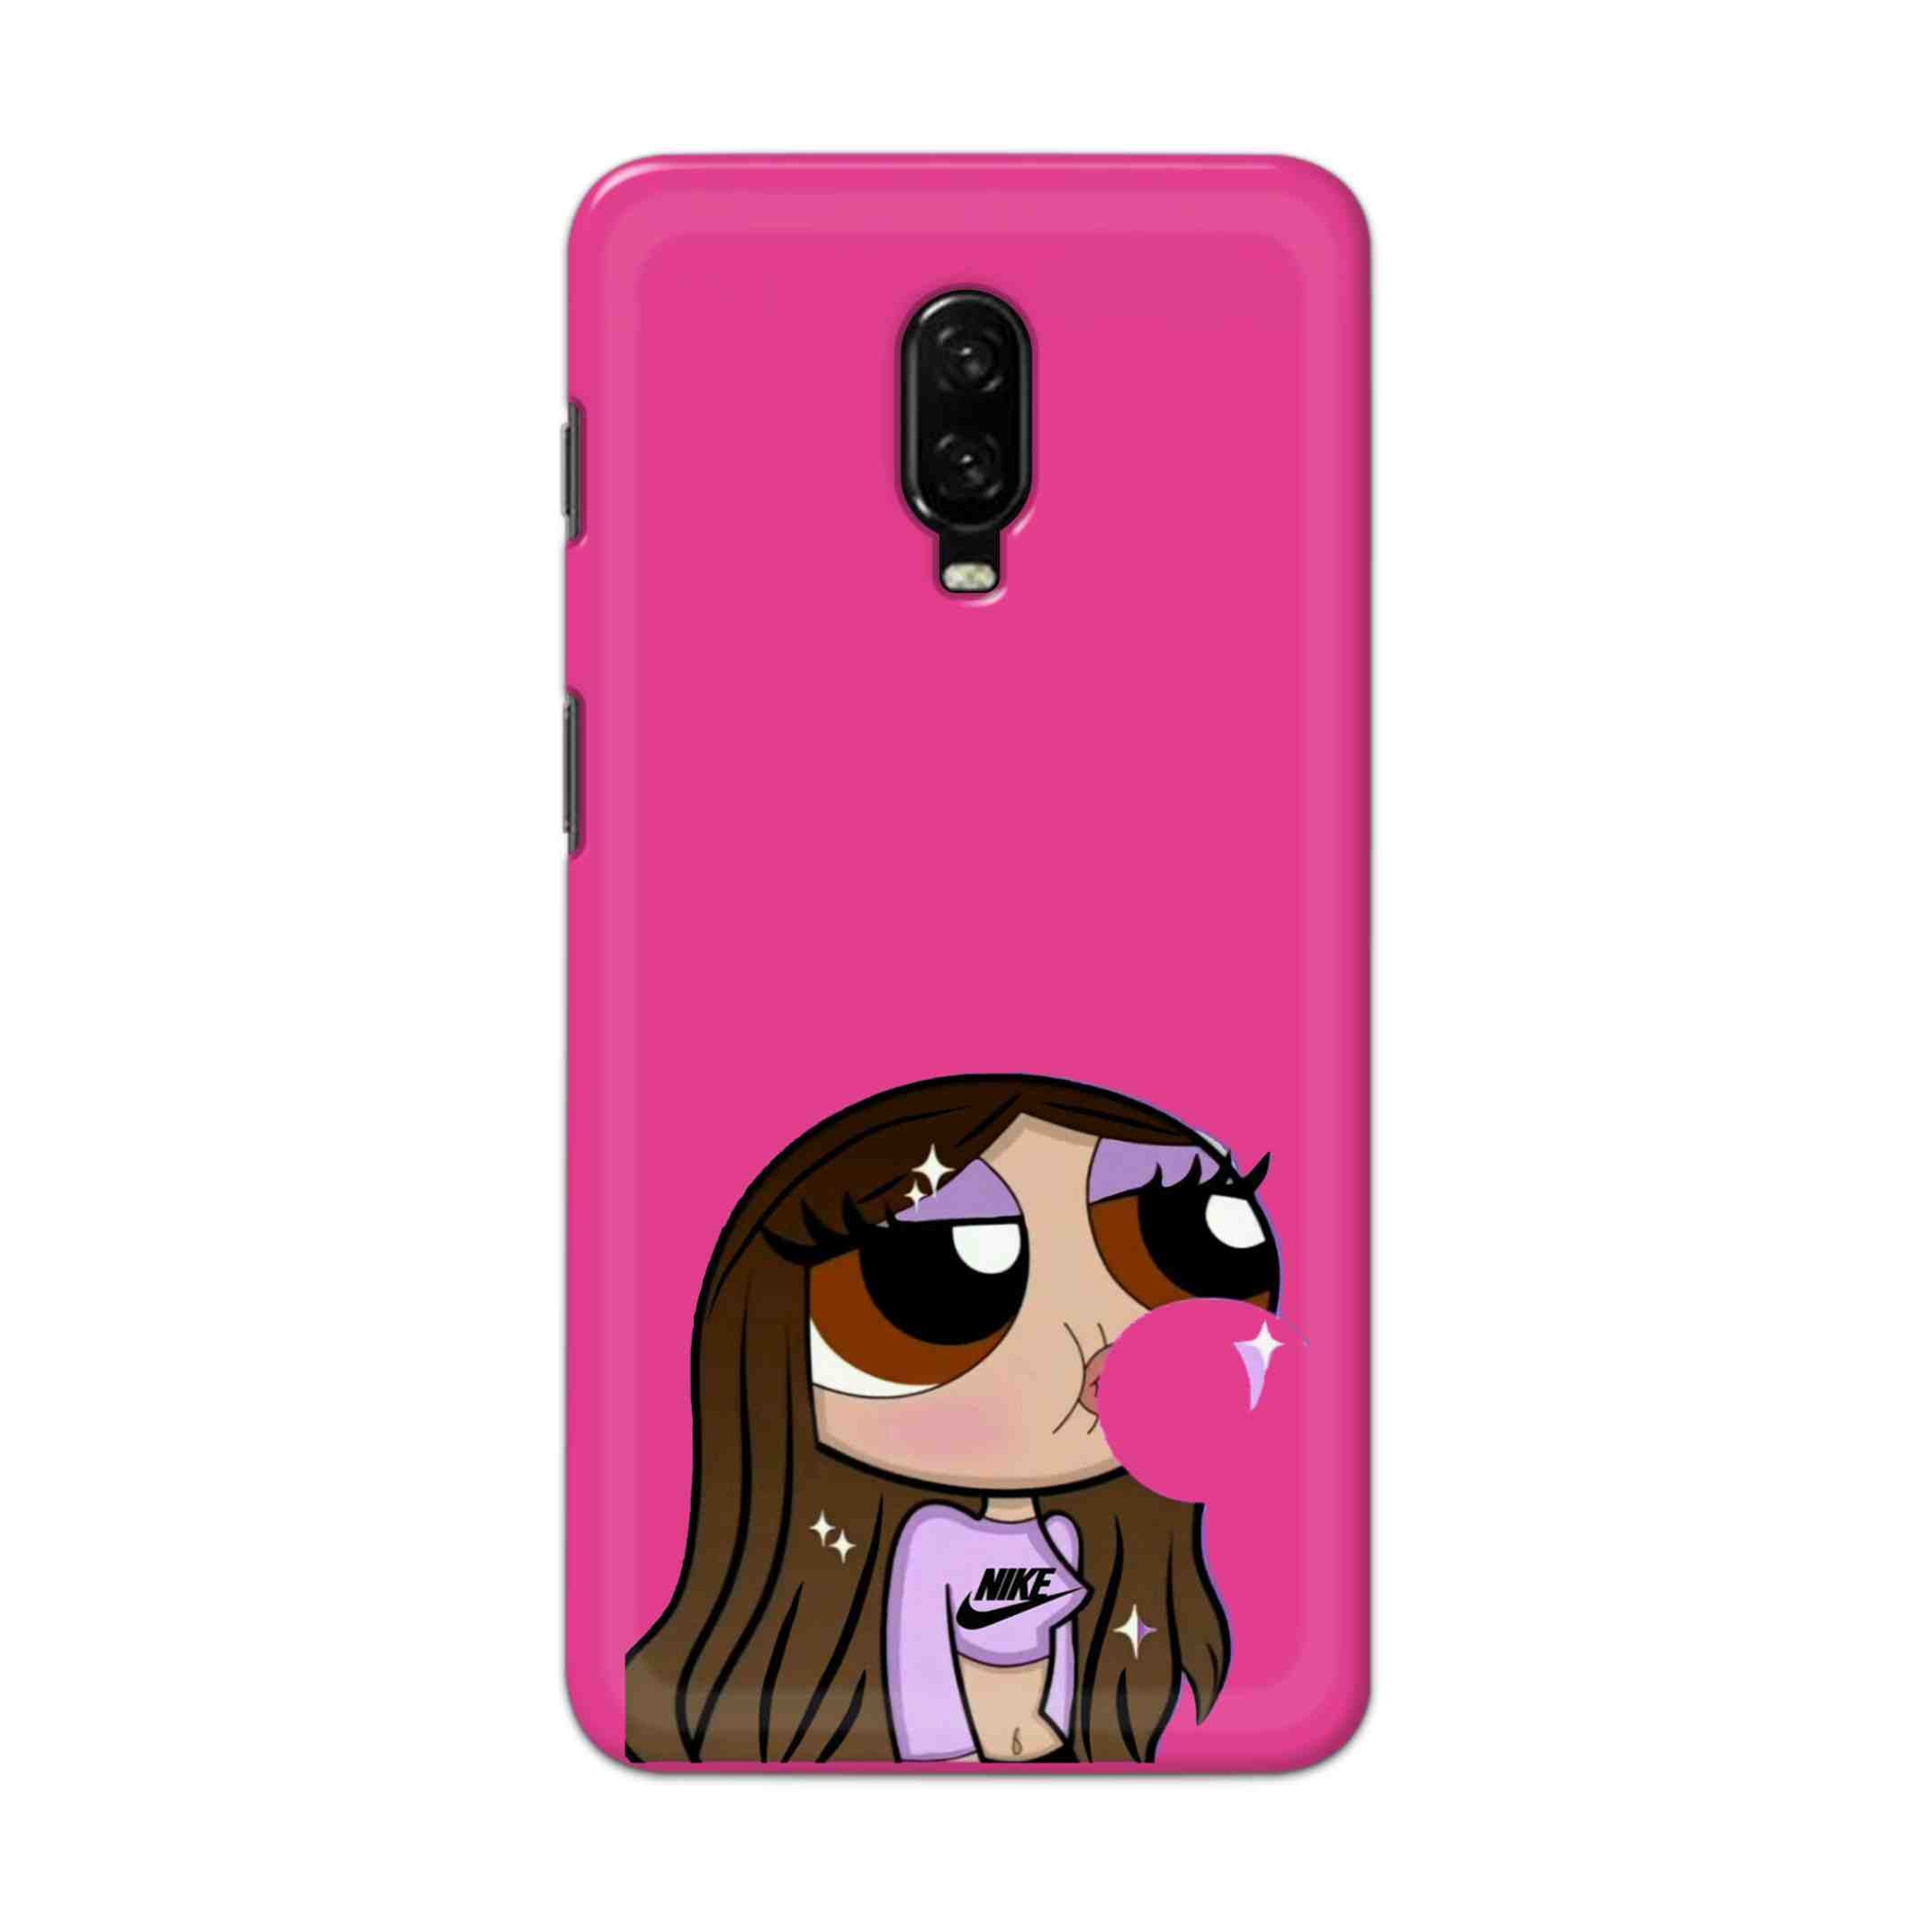 Buy Bubble Girl Hard Back Mobile Phone Case Cover For OnePlus 6T Online